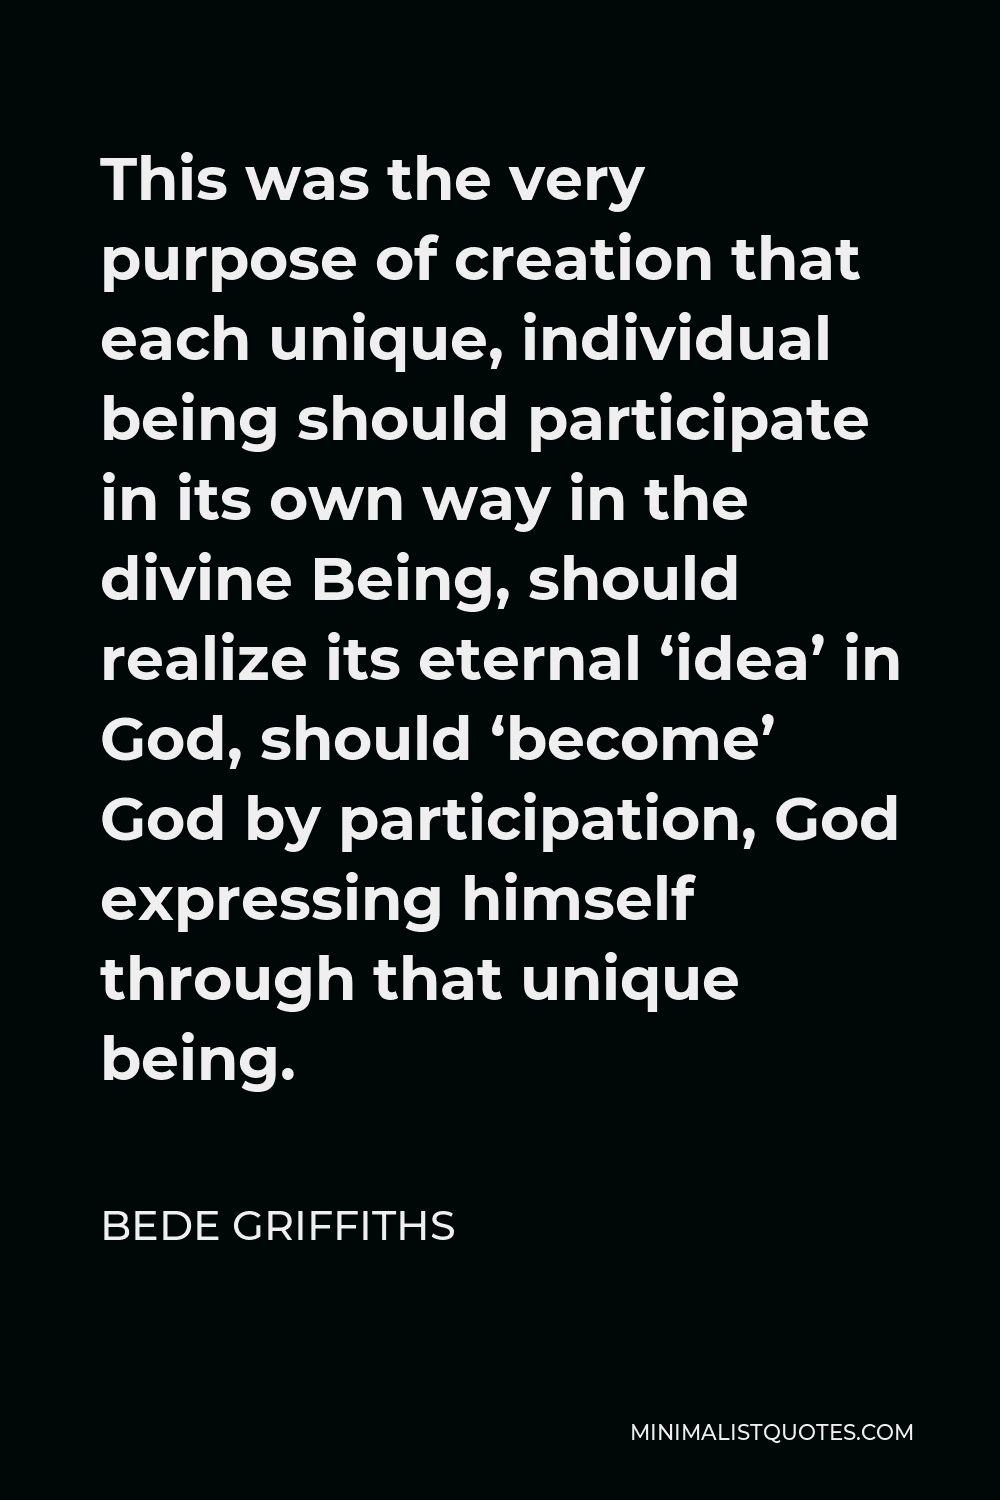 Bede Griffiths Quote - This was the very purpose of creation that each unique, individual being should participate in its own way in the divine Being, should realize its eternal ‘idea’ in God, should ‘become’ God by participation, God expressing himself through that unique being.